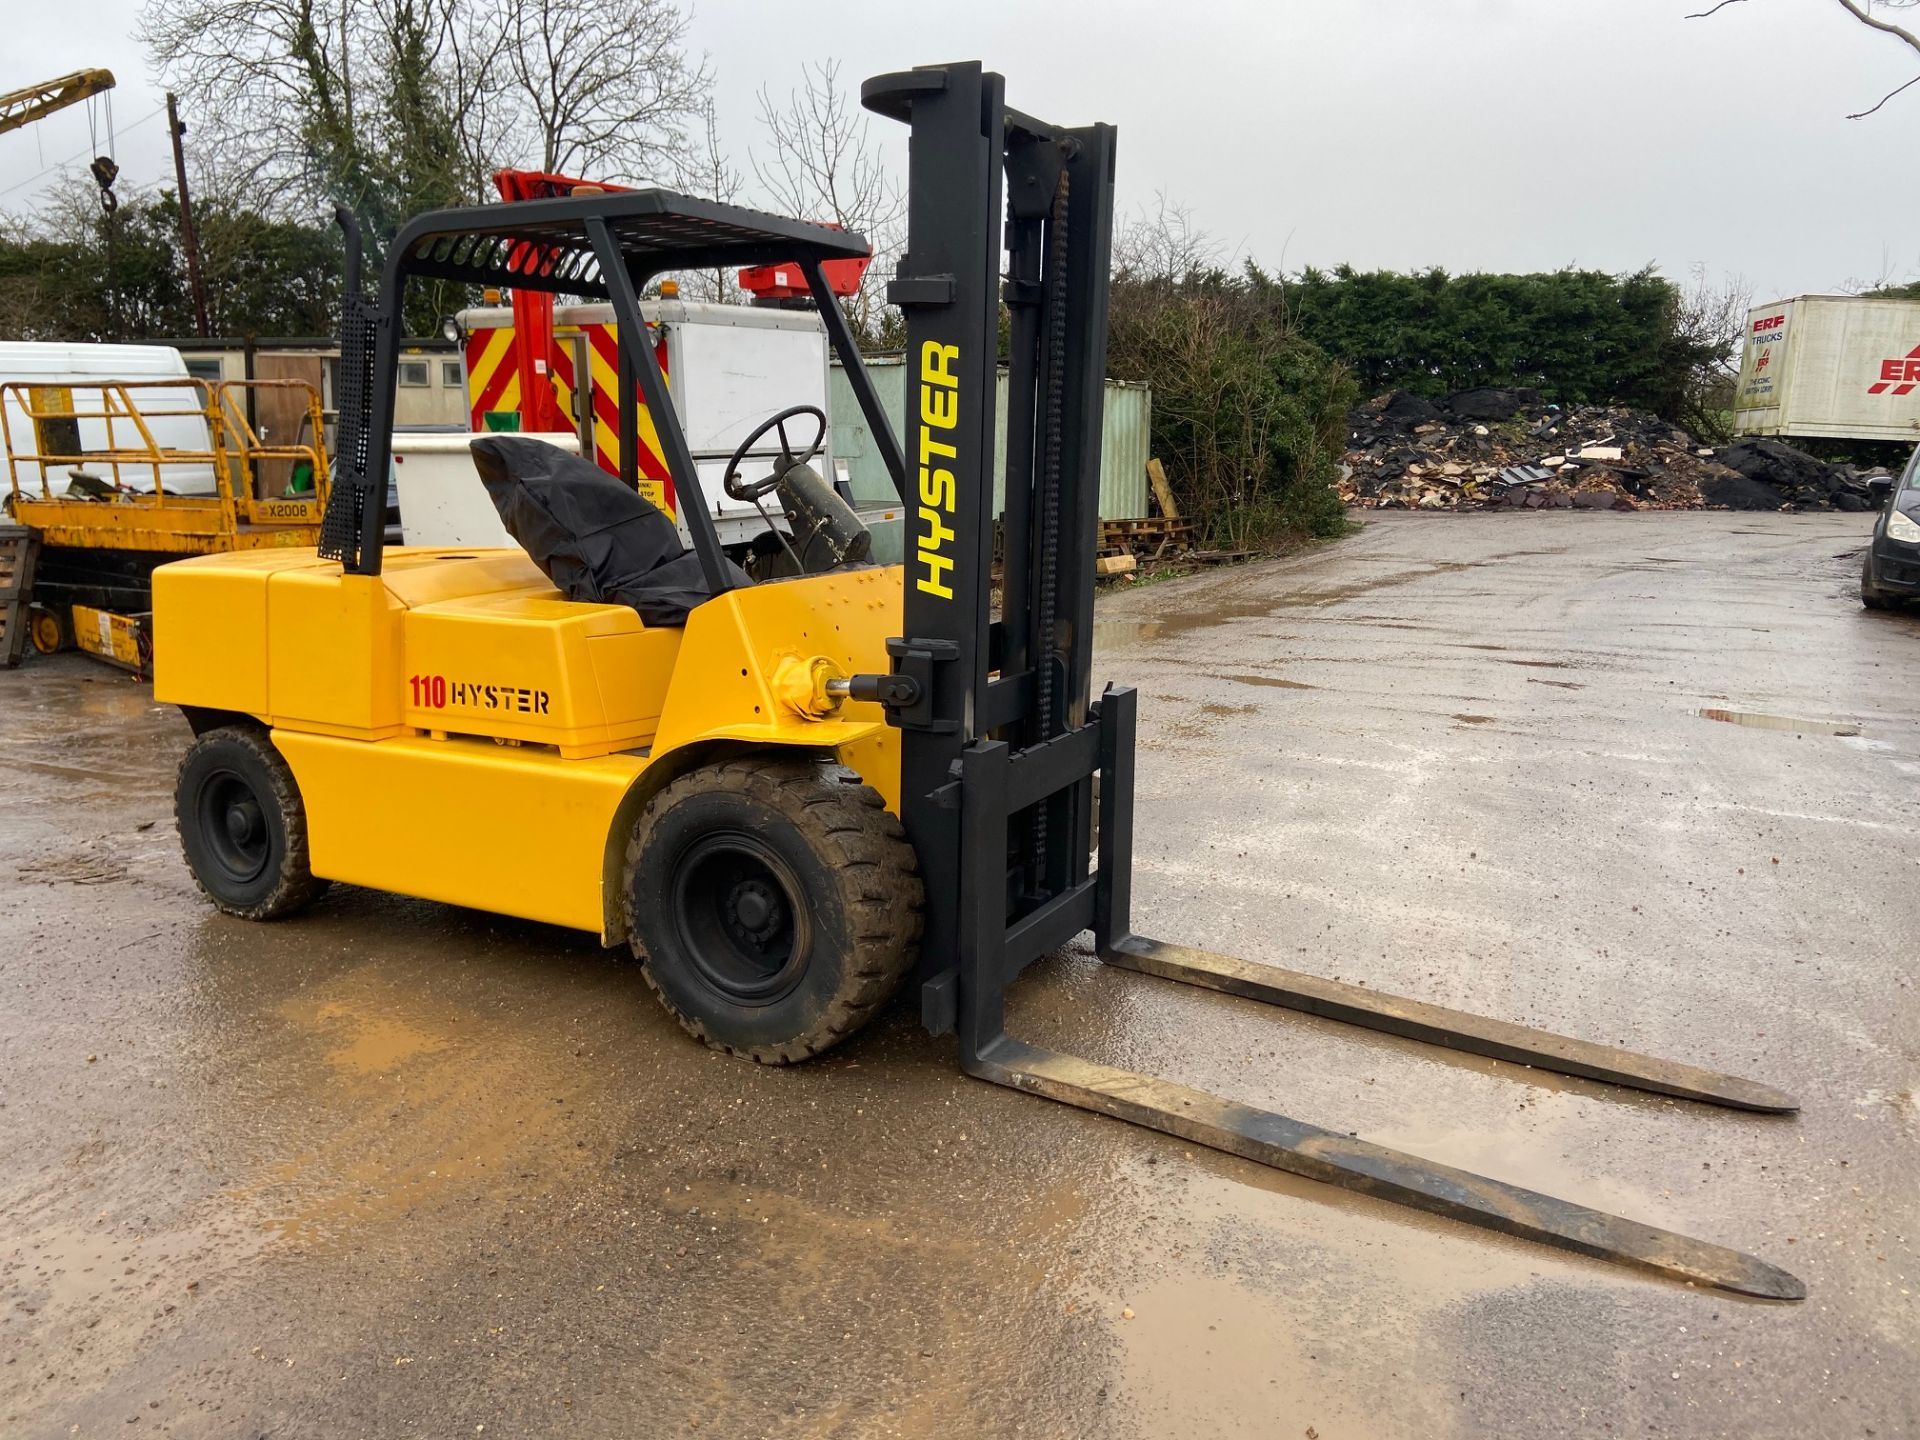 HYSTER H110 5 TON LIFT DIESEL FORKLIFT, PERKINS 4 CYLINDER ENGINE, OPERATES & WORKS AS IT SHOULD